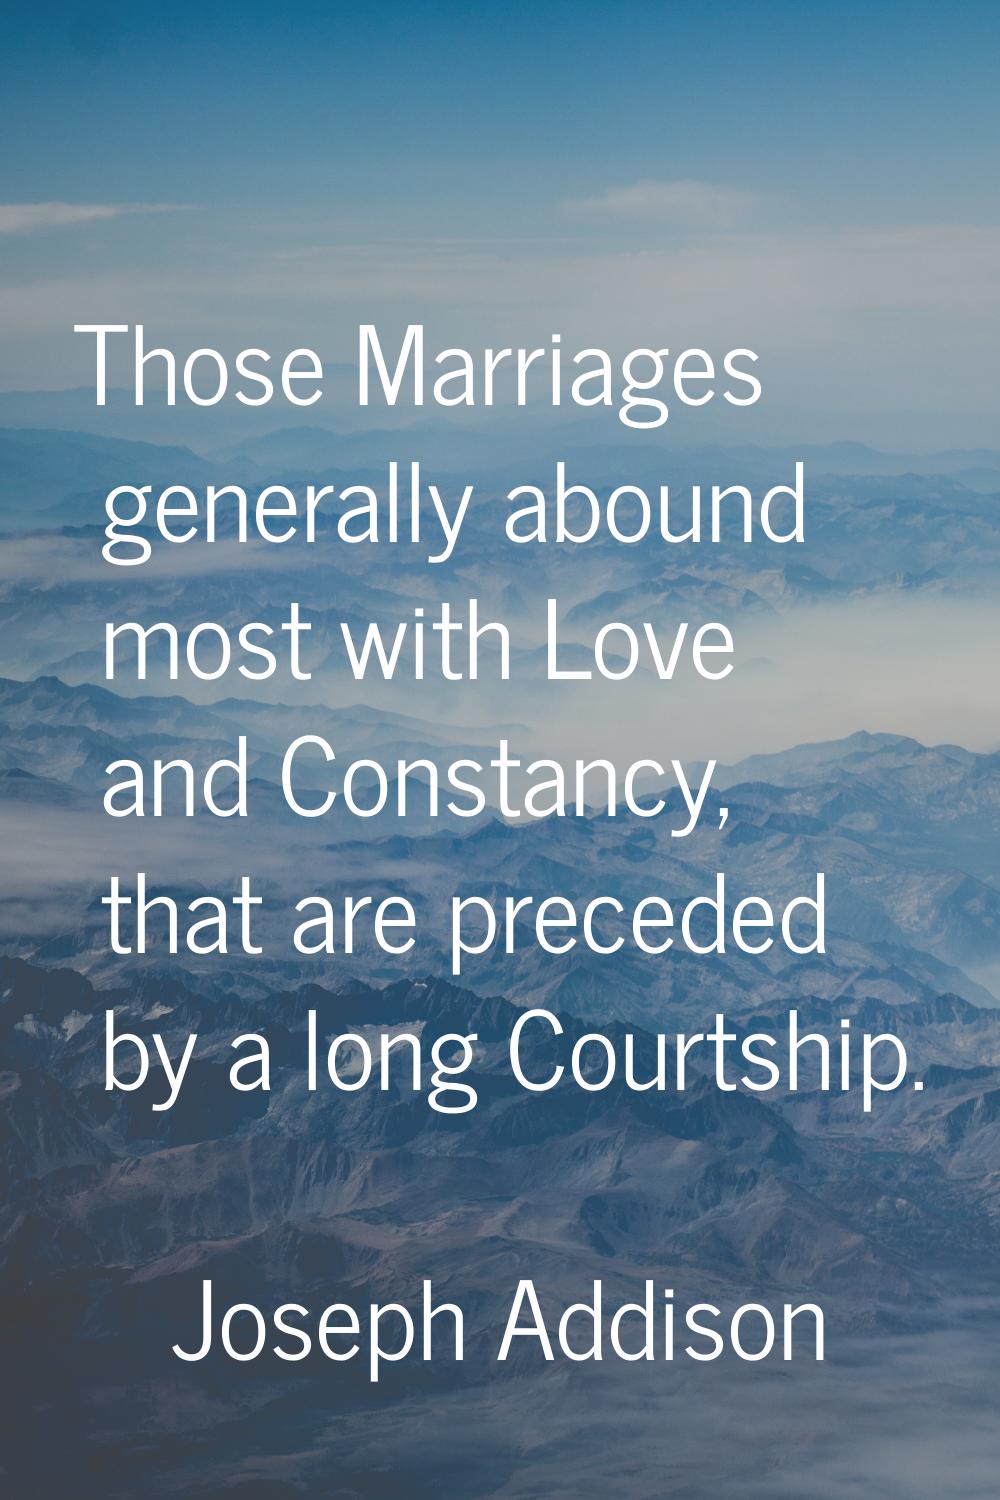 Those Marriages generally abound most with Love and Constancy, that are preceded by a long Courtshi